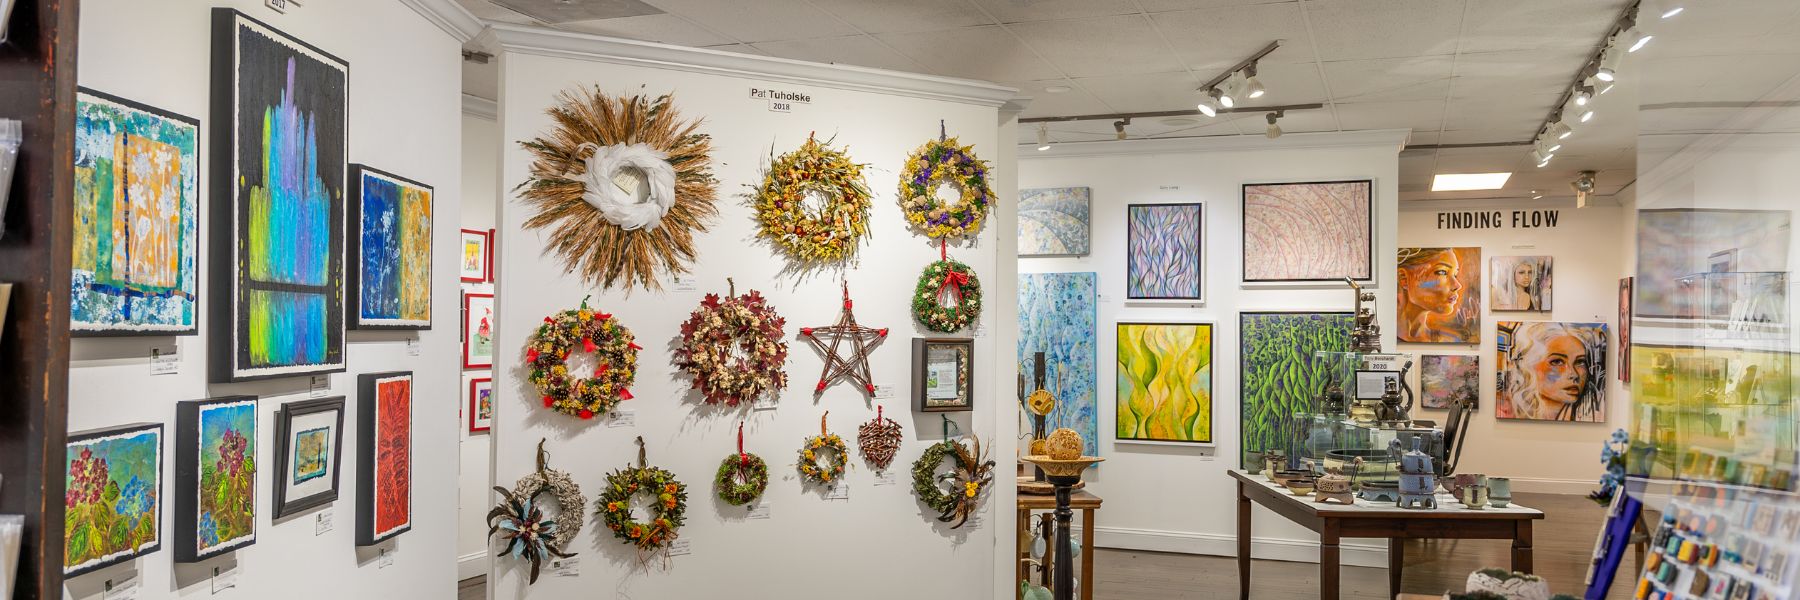 Thirty-six resident artists display their work at Green Door Art Gallery in St. Louis.